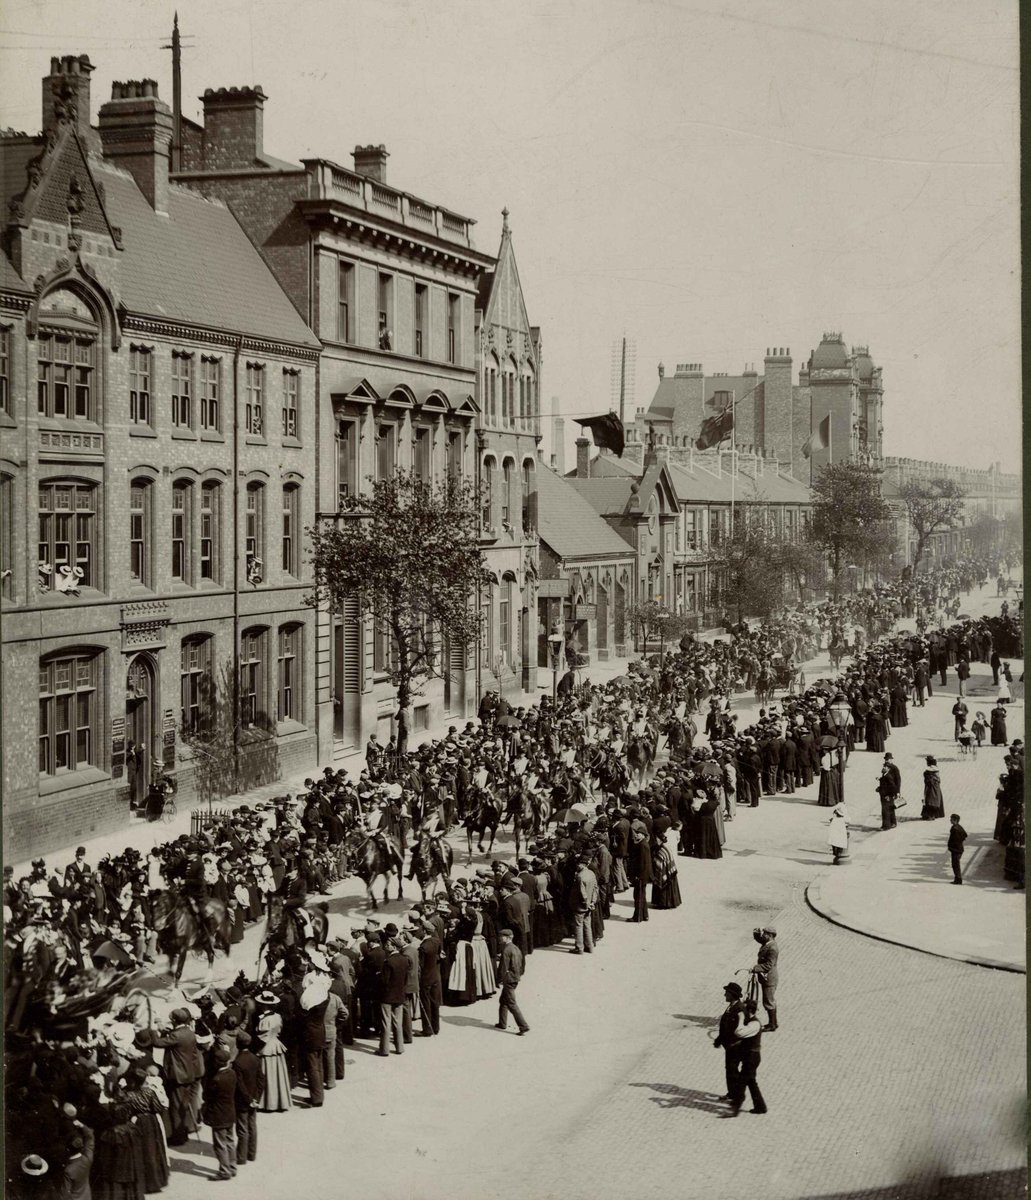 Are you joining us at Middlesbrough’s #HiStreetFest on Saturday 29 July which includes a free community parade?

This lovely image from our collections shows a procession in 1897 for Queen Victoria’s Diamond Jubilee passing in front of our old home in Exchange Square (Marton Rd)